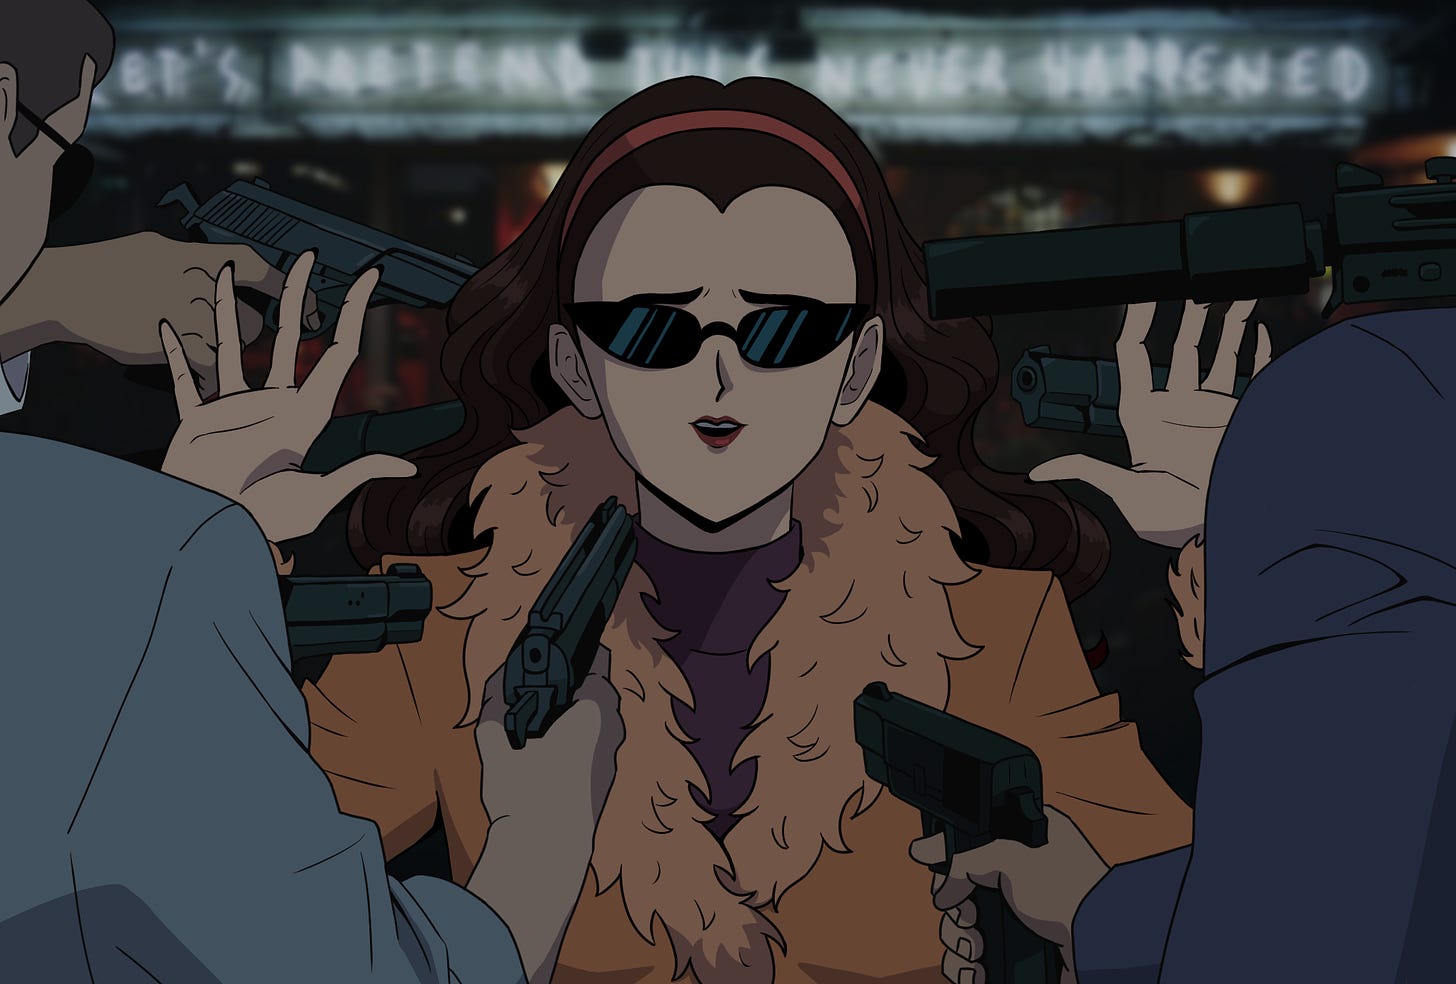 Fran Fine drawn anime-style with a bunch of guns pointed at her in some sort of spy fiction.